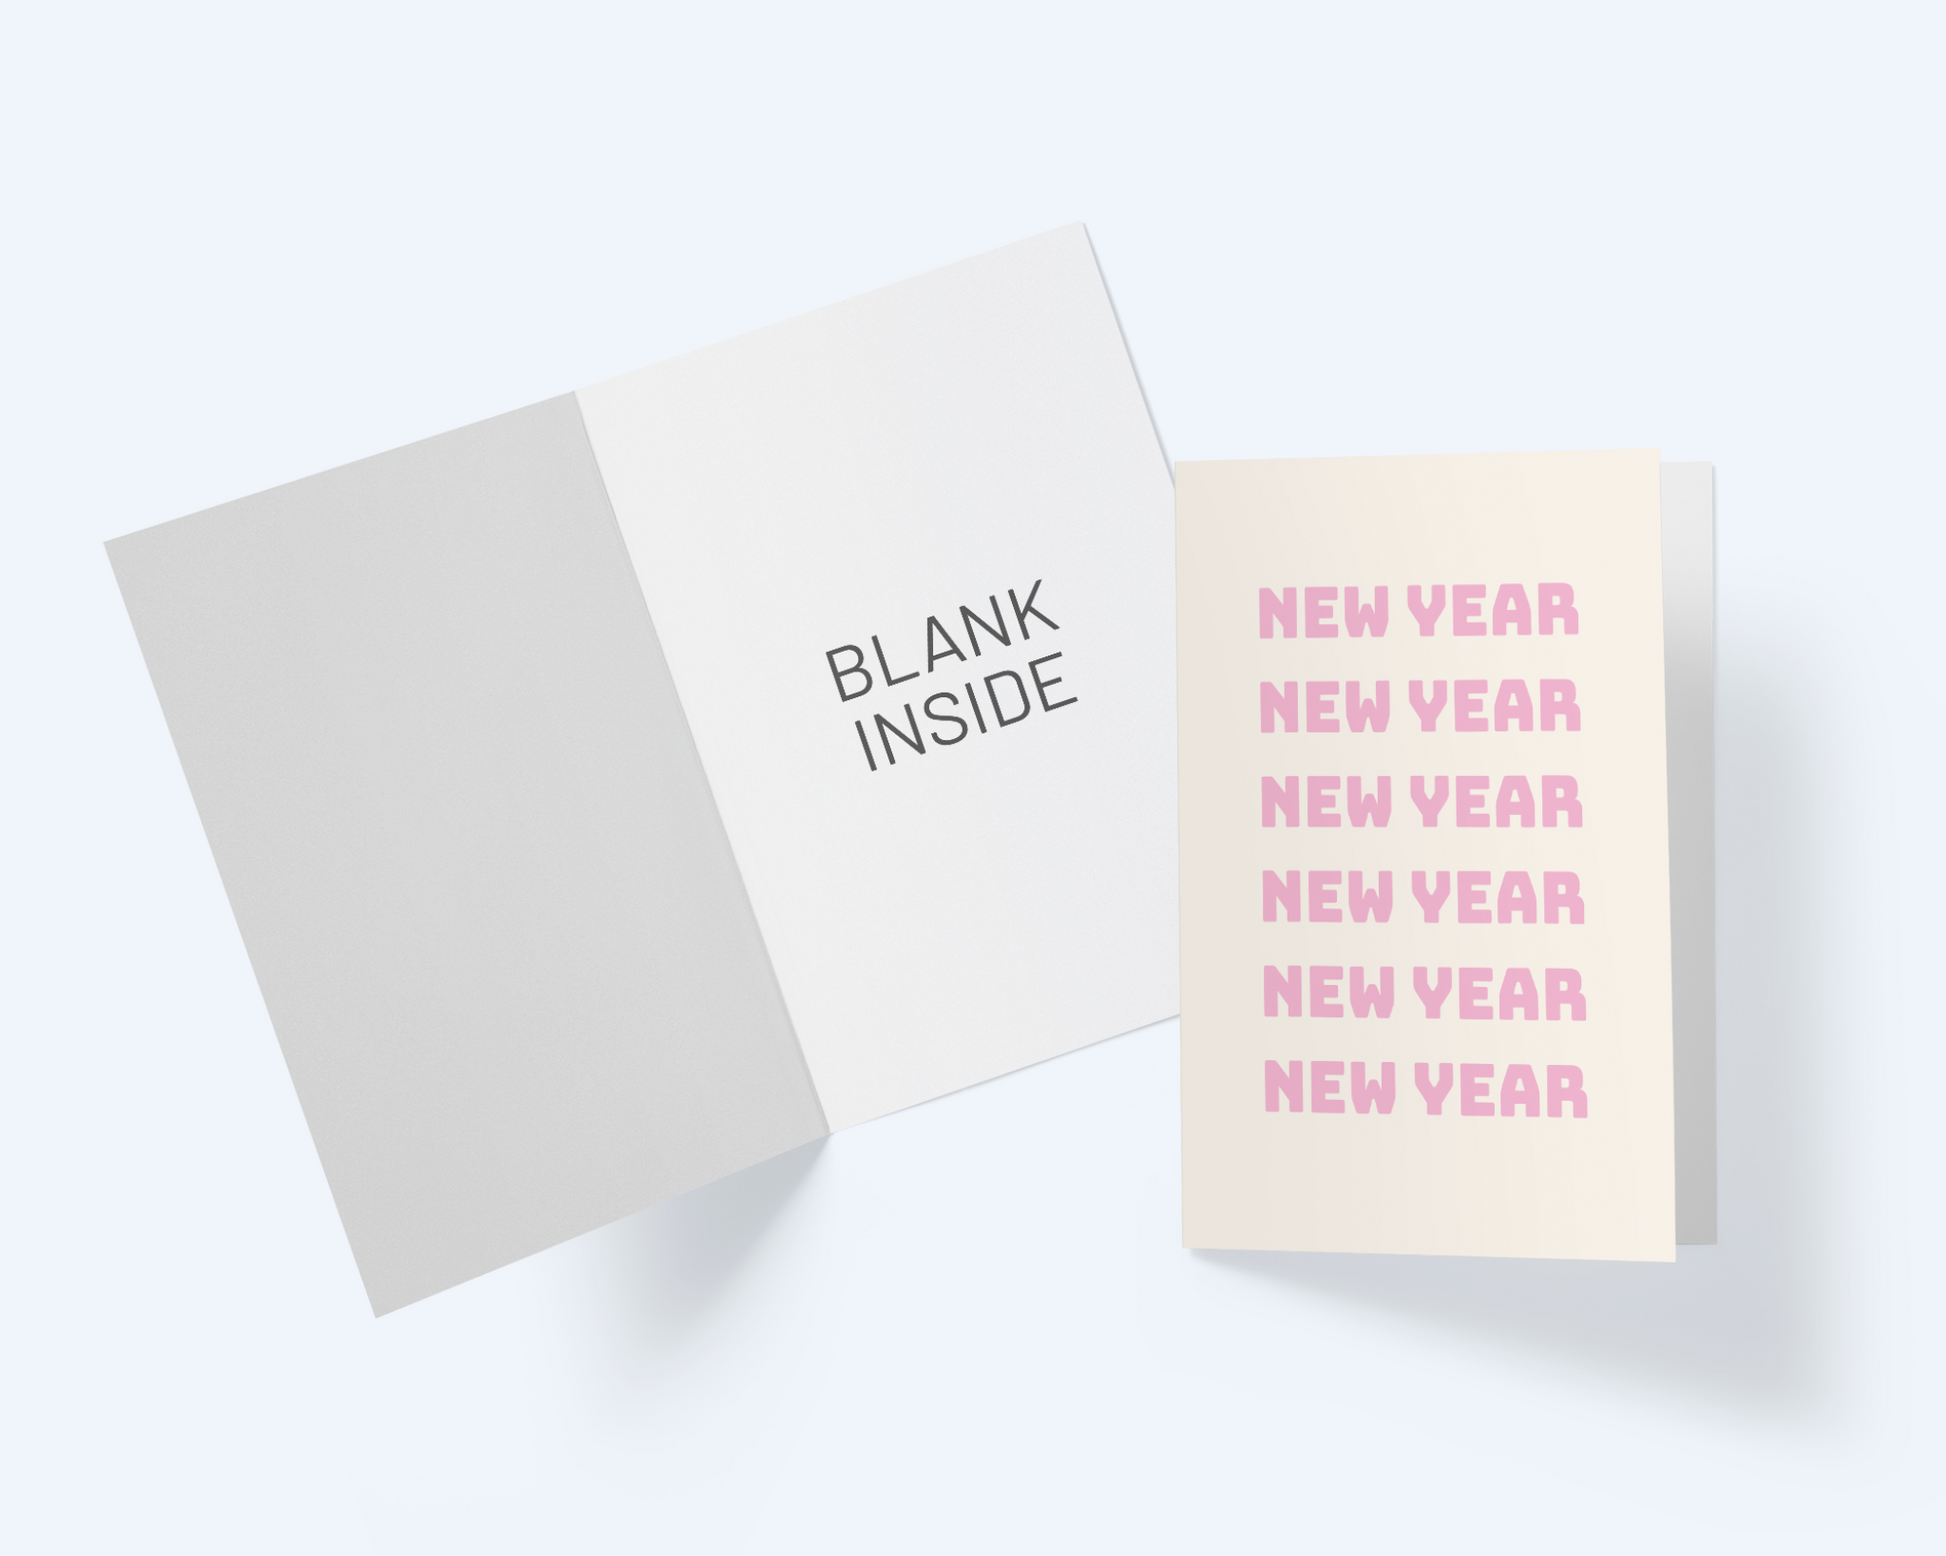 New Year Greeting Card, Note Card For New Year's Day.